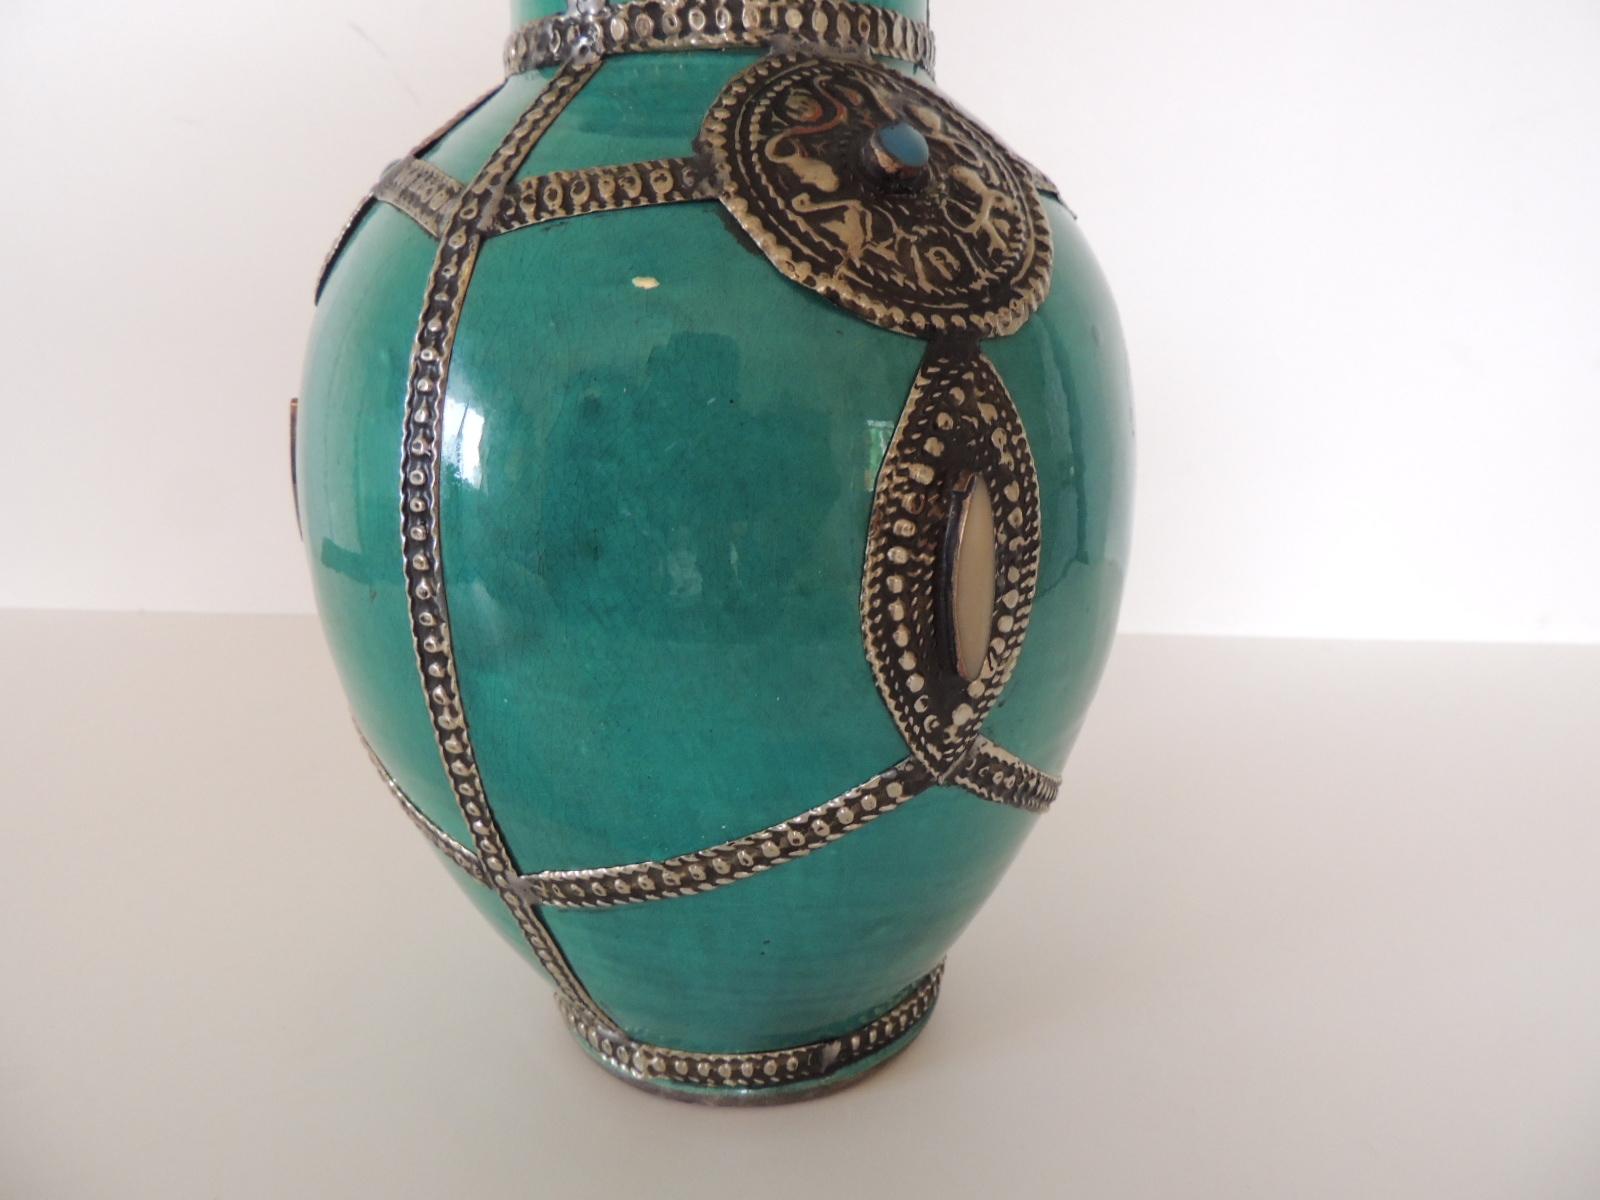 Hand-Crafted Round Kelly Green Terracotta Moroccan Vase